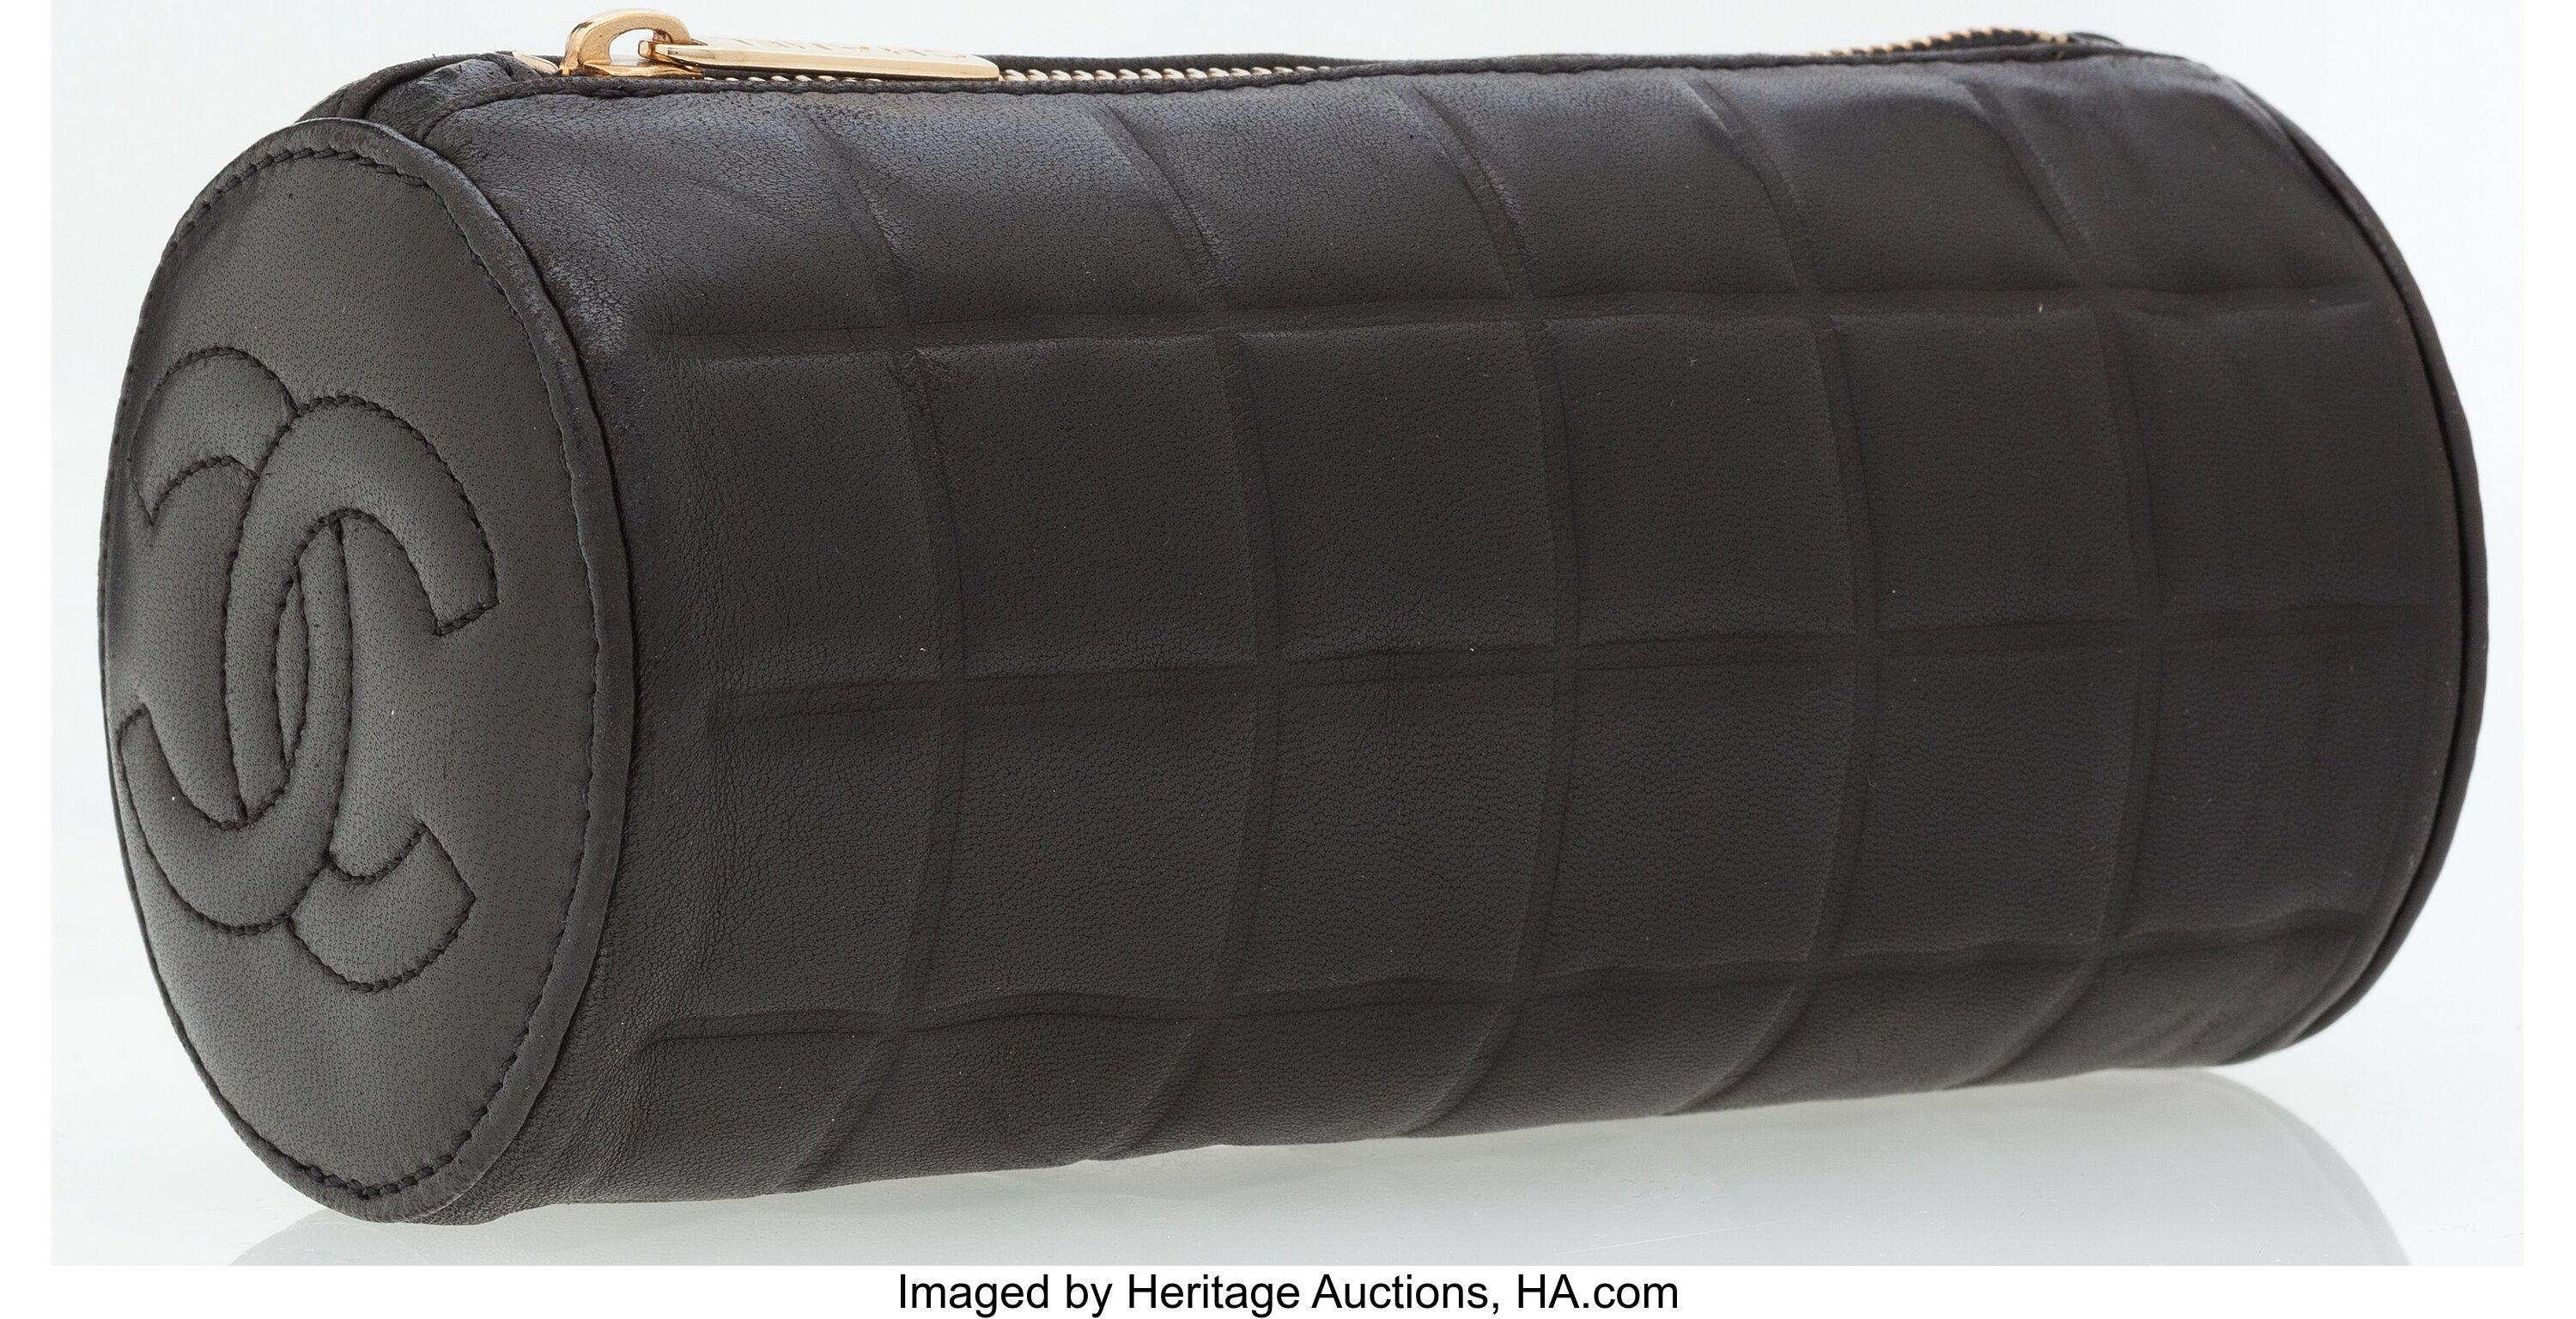 Chanel Black Lambskin Leather Cosmetic Bag.  Luxury Accessories